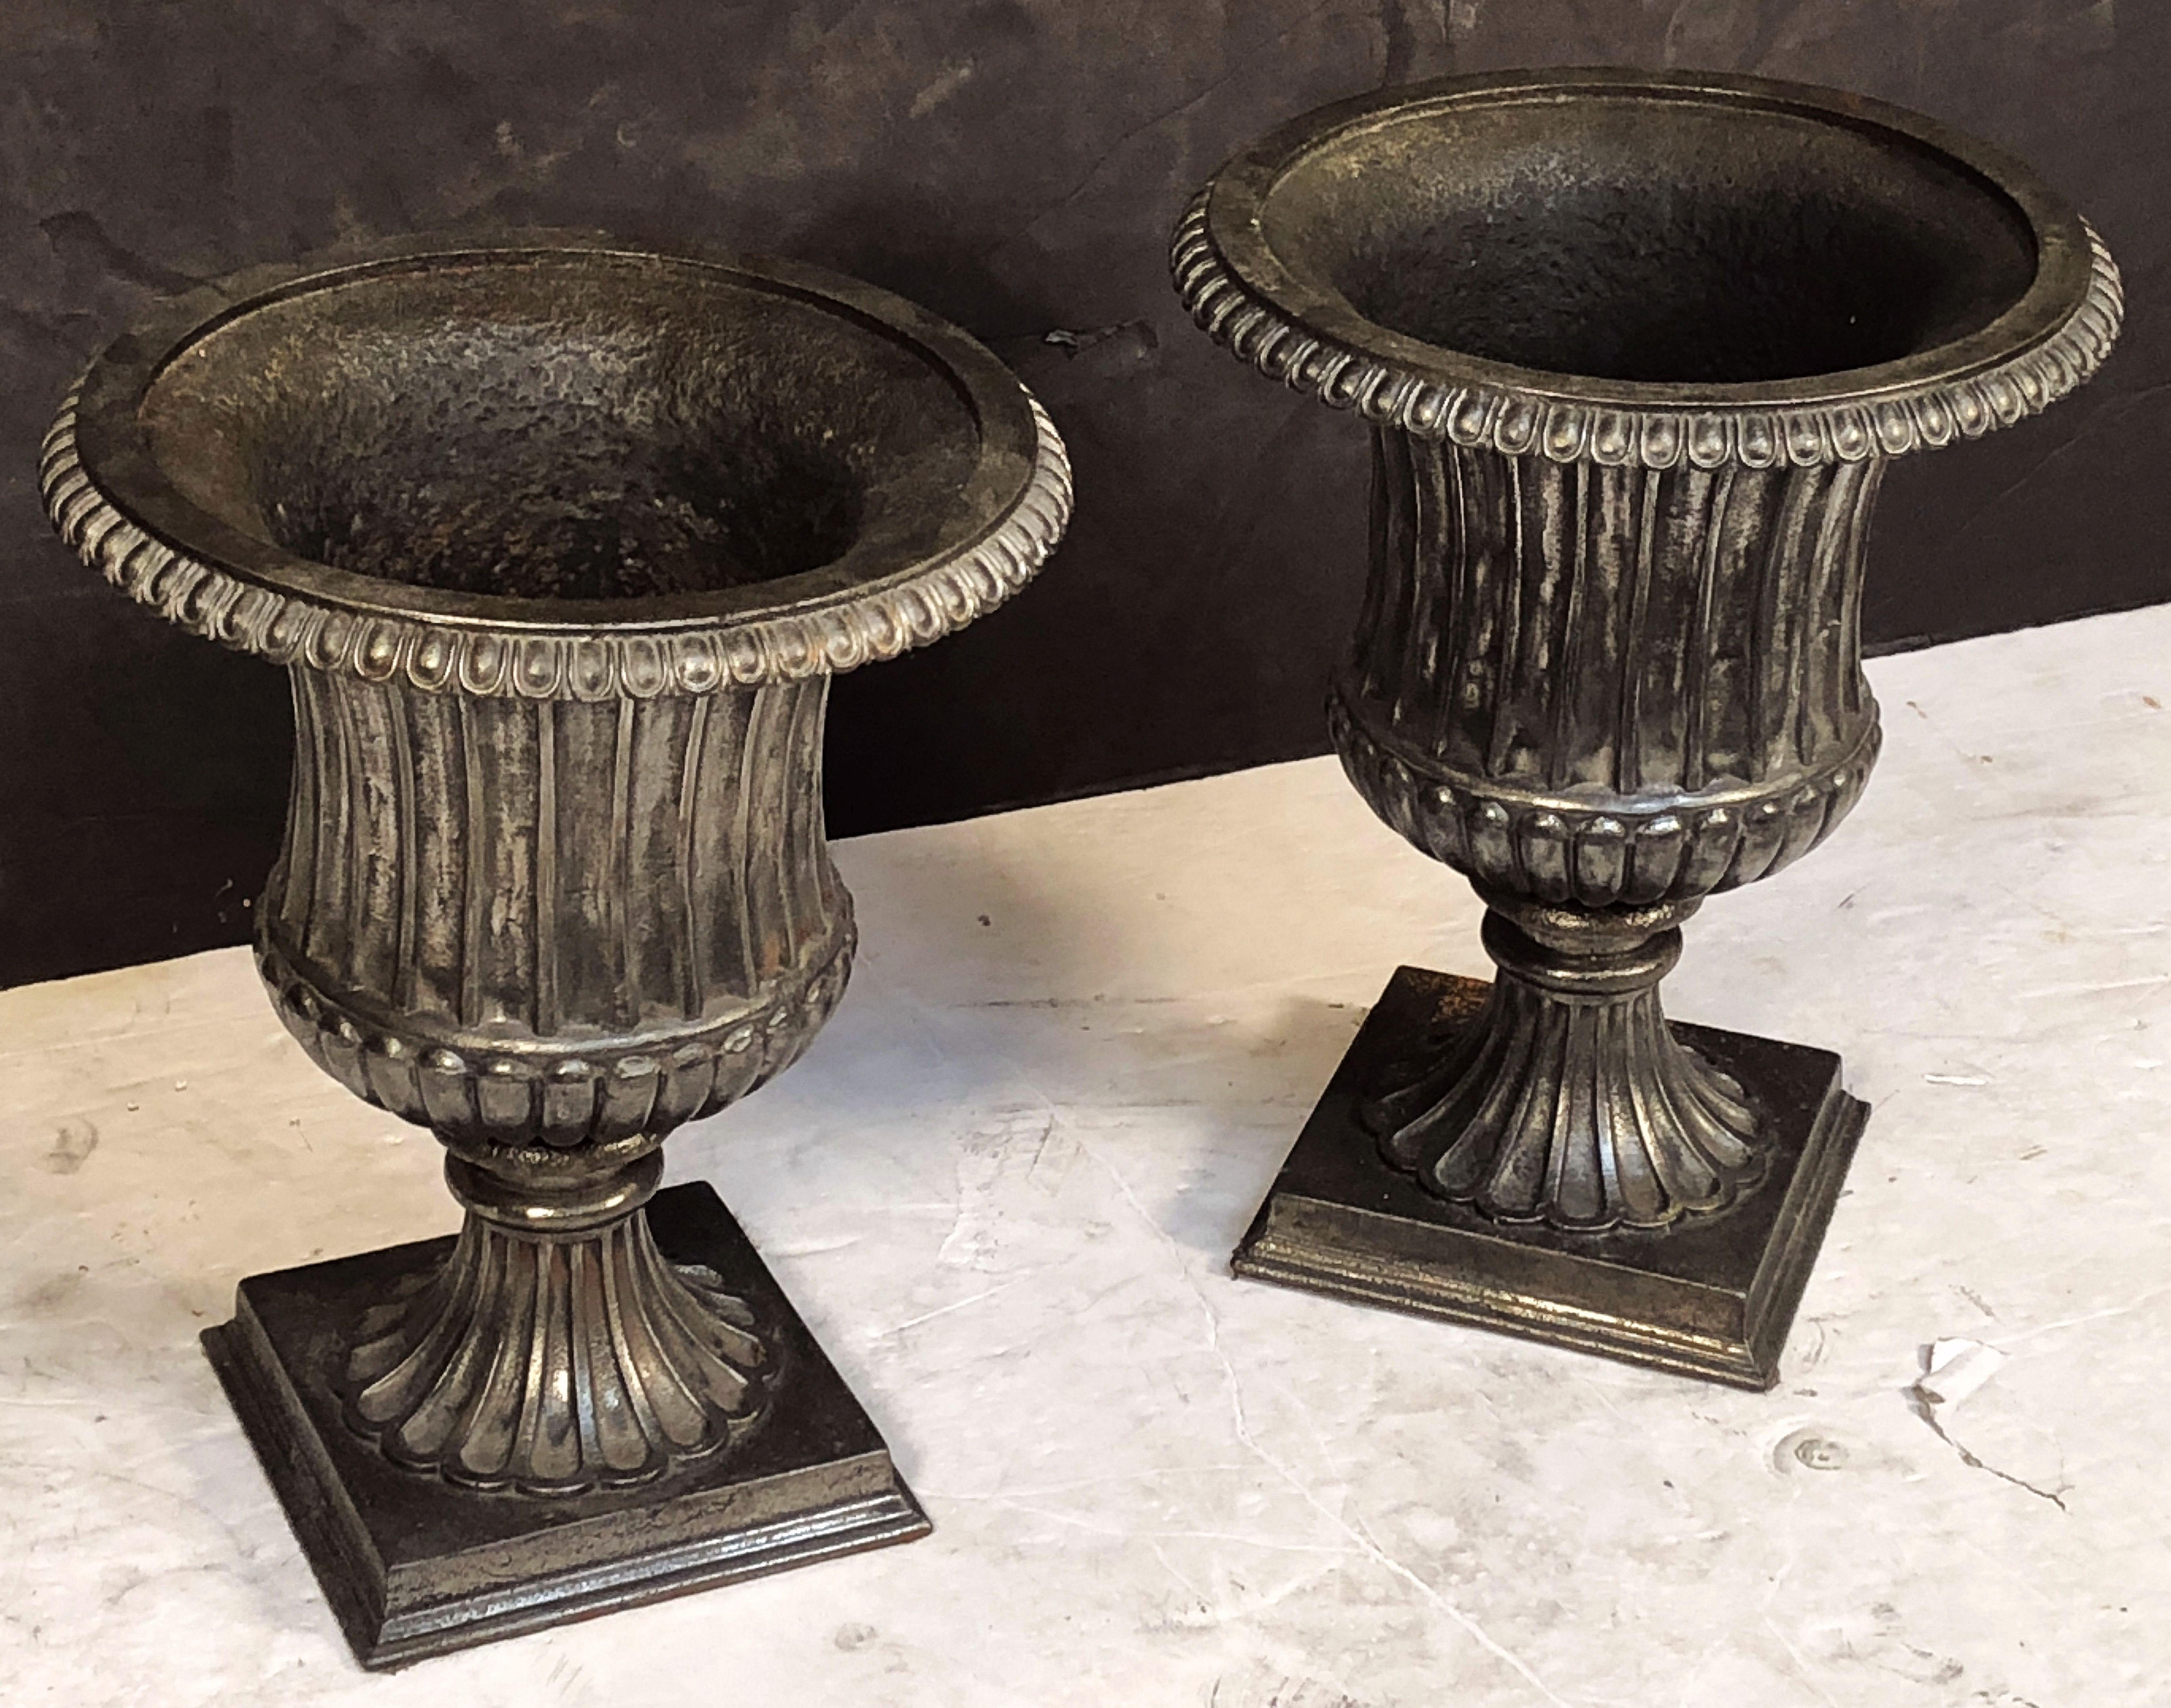 A fine pair of English garden urns or planters of cast iron with a pewter or gun-metal finish, each planter urn featuring a Classical design with egg-and-dart everted rim, lobed body on a reeded round foot, and resting on a square plinth